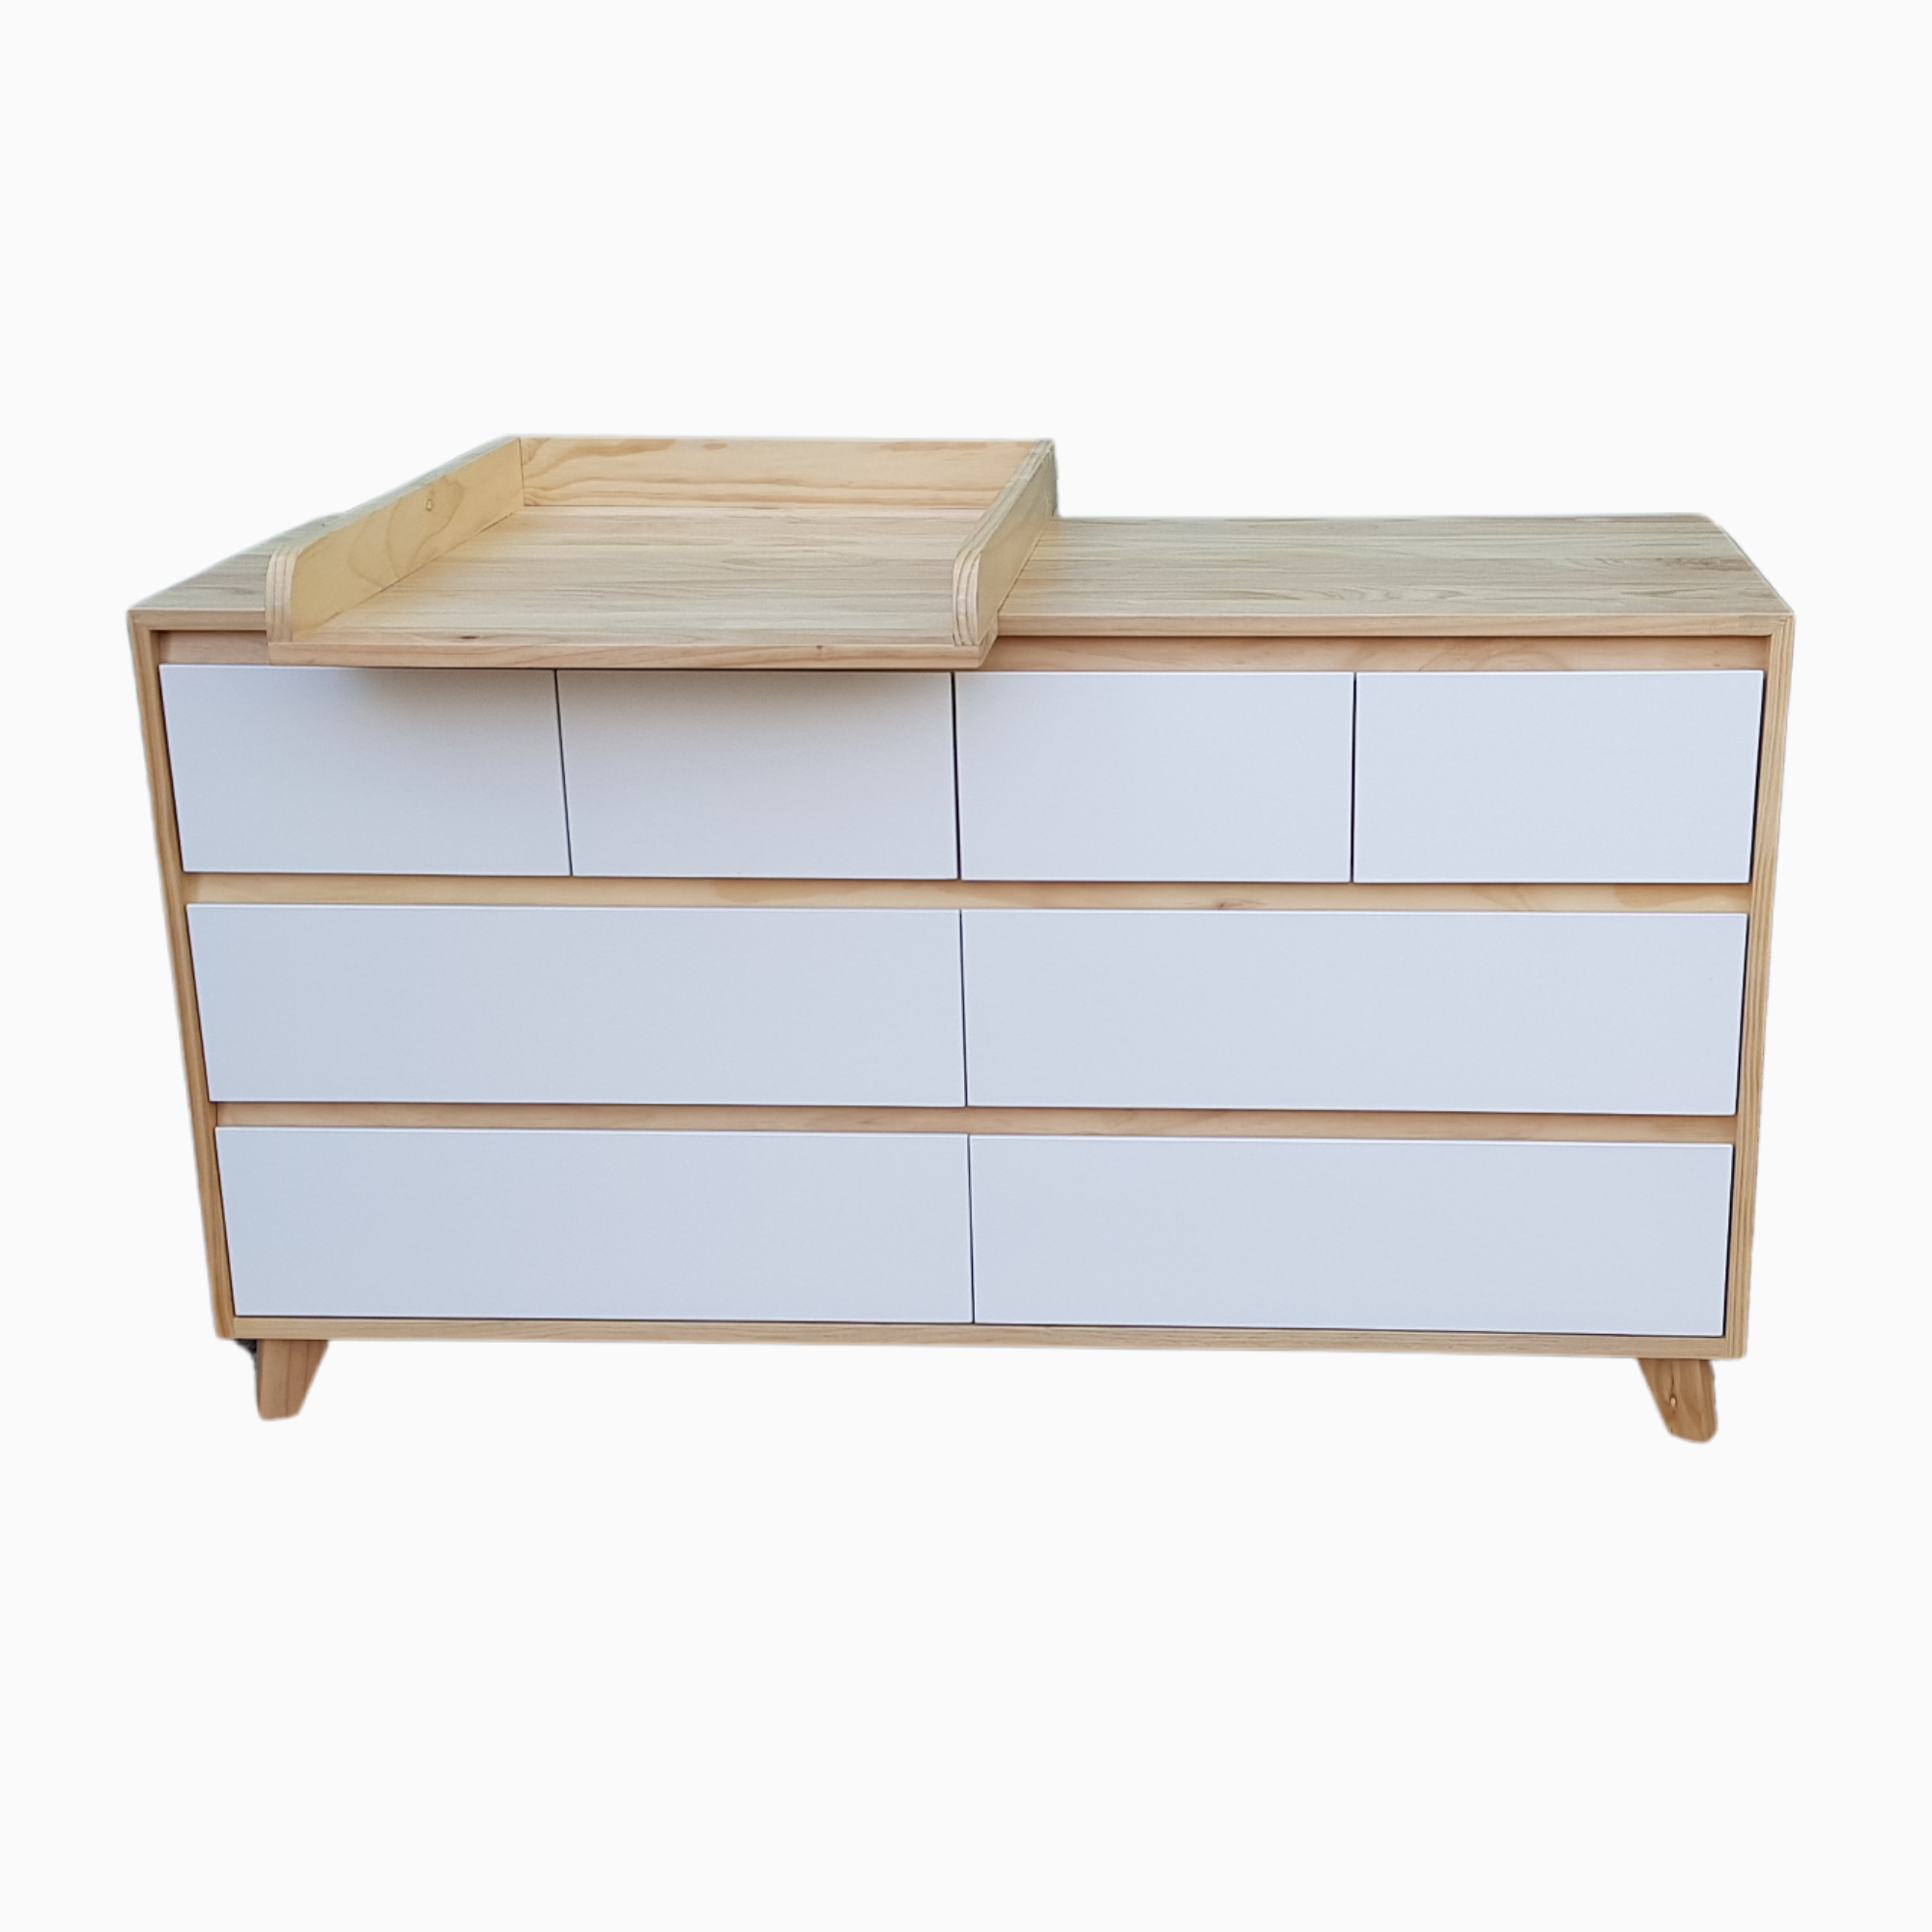 BRIMAR SOLID TIMBER 8 DRAWER LOWBOY WITH A DETACHABLE CHANGING TABLE